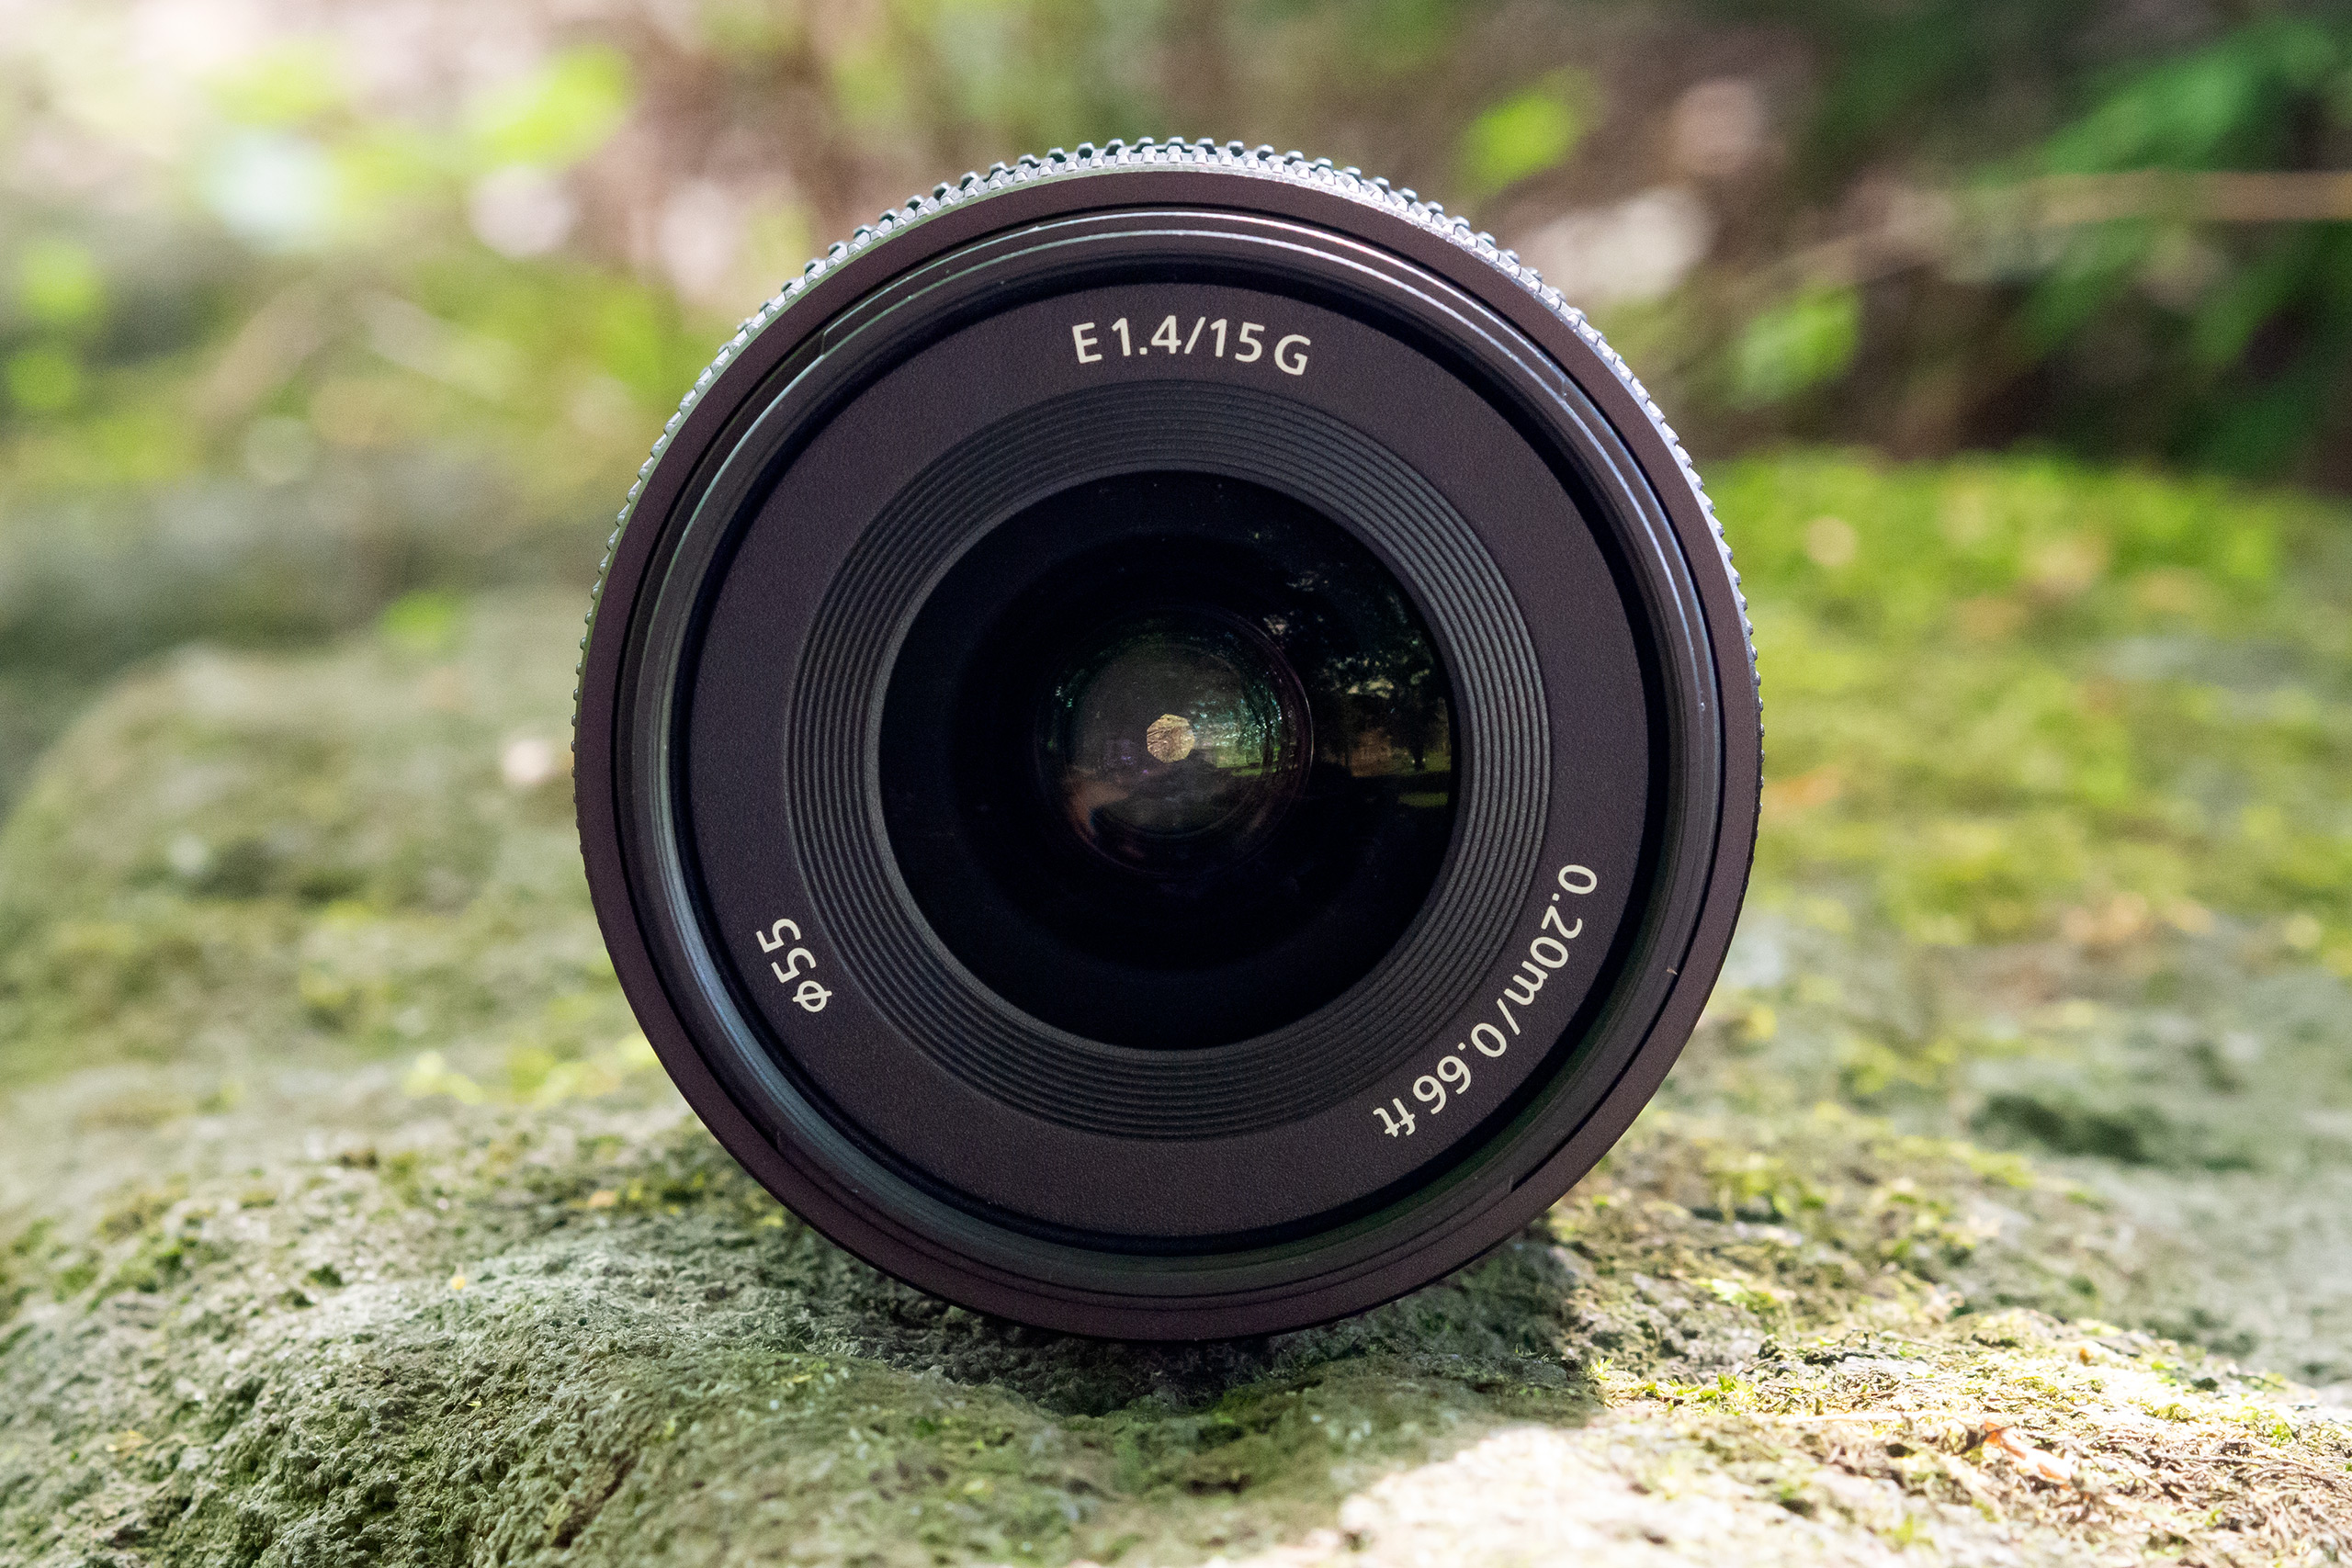 Sony E 15mm F1.4 G front of lens